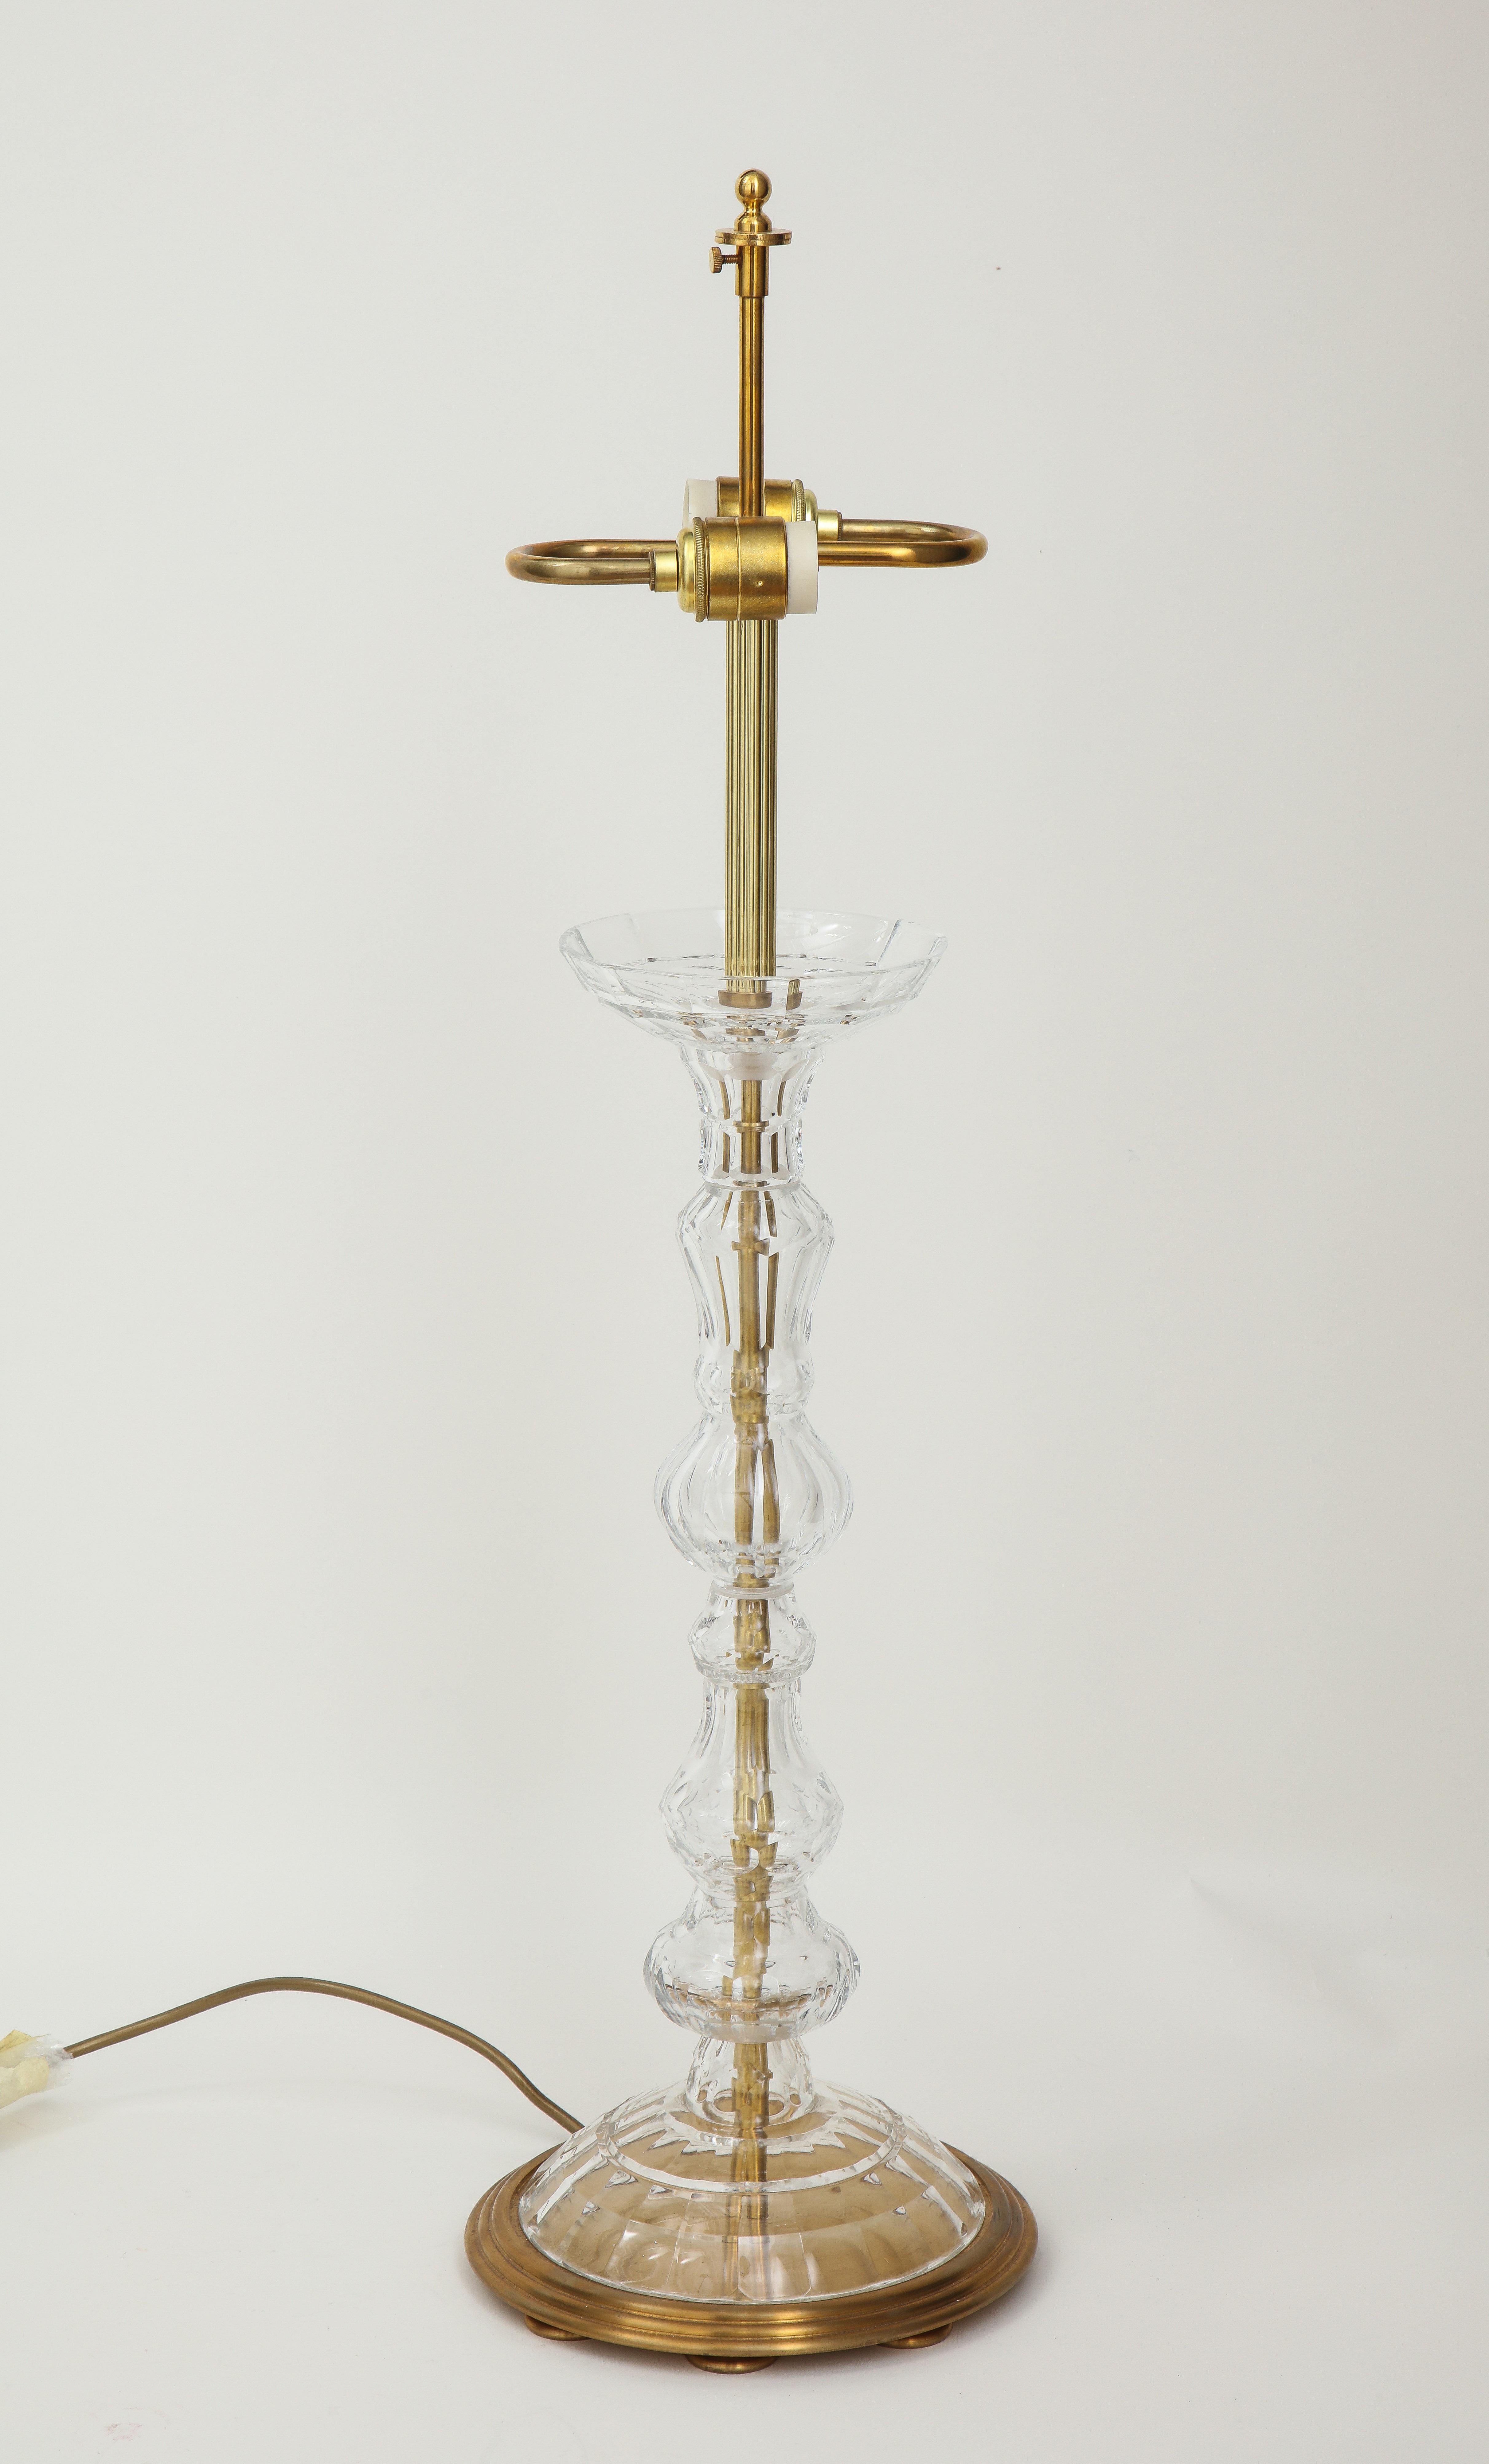 Form based on a candlestick. Beautiful quality and a go-to for the interior designer Mario Buatta. Most likely purchased from Colefax and Fowler. From his personal collection. Height to top of glass: 21.25